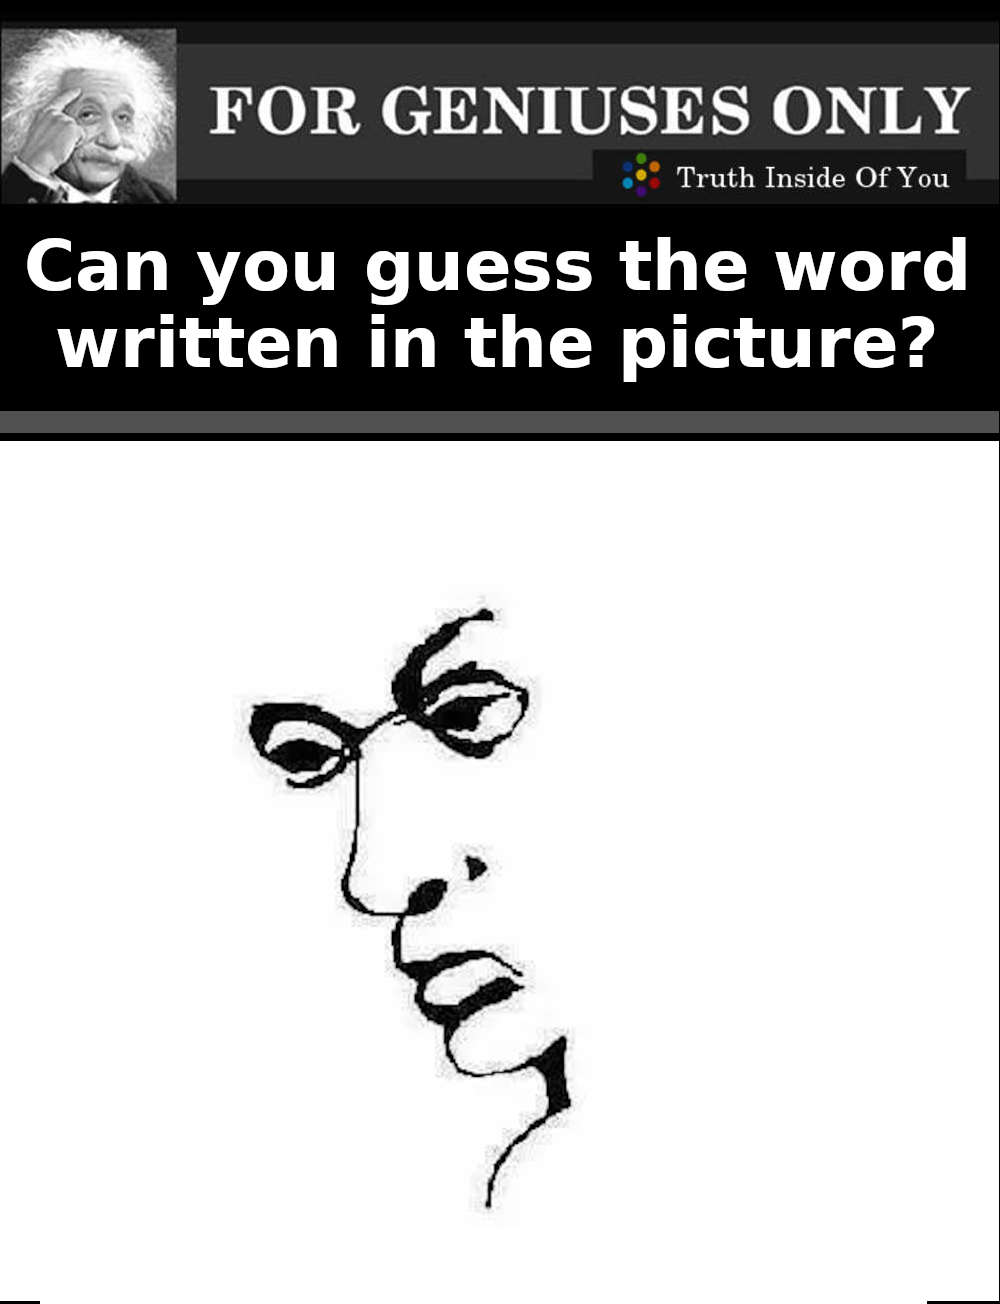 Can you guess the word written in the picture?